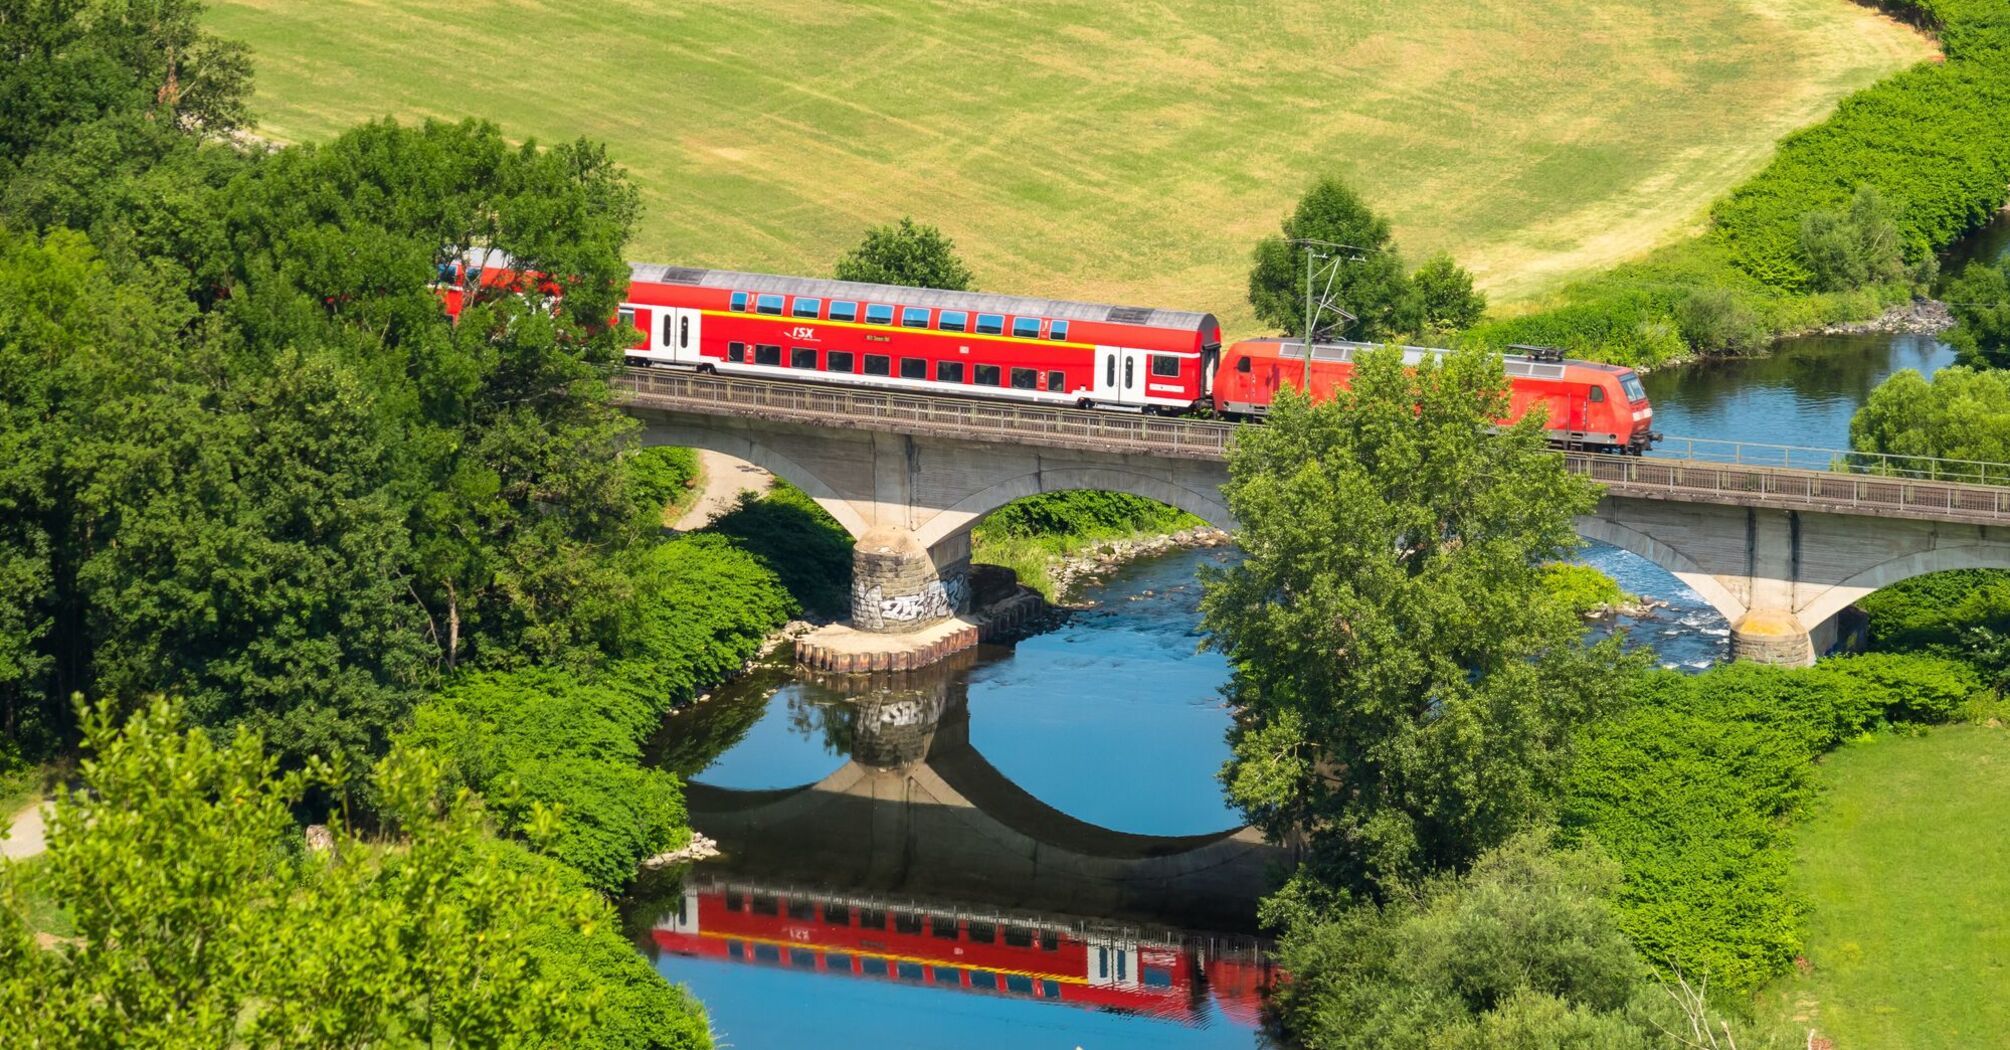 Tickets from €1: the best railways in Europe offering unlimited travel